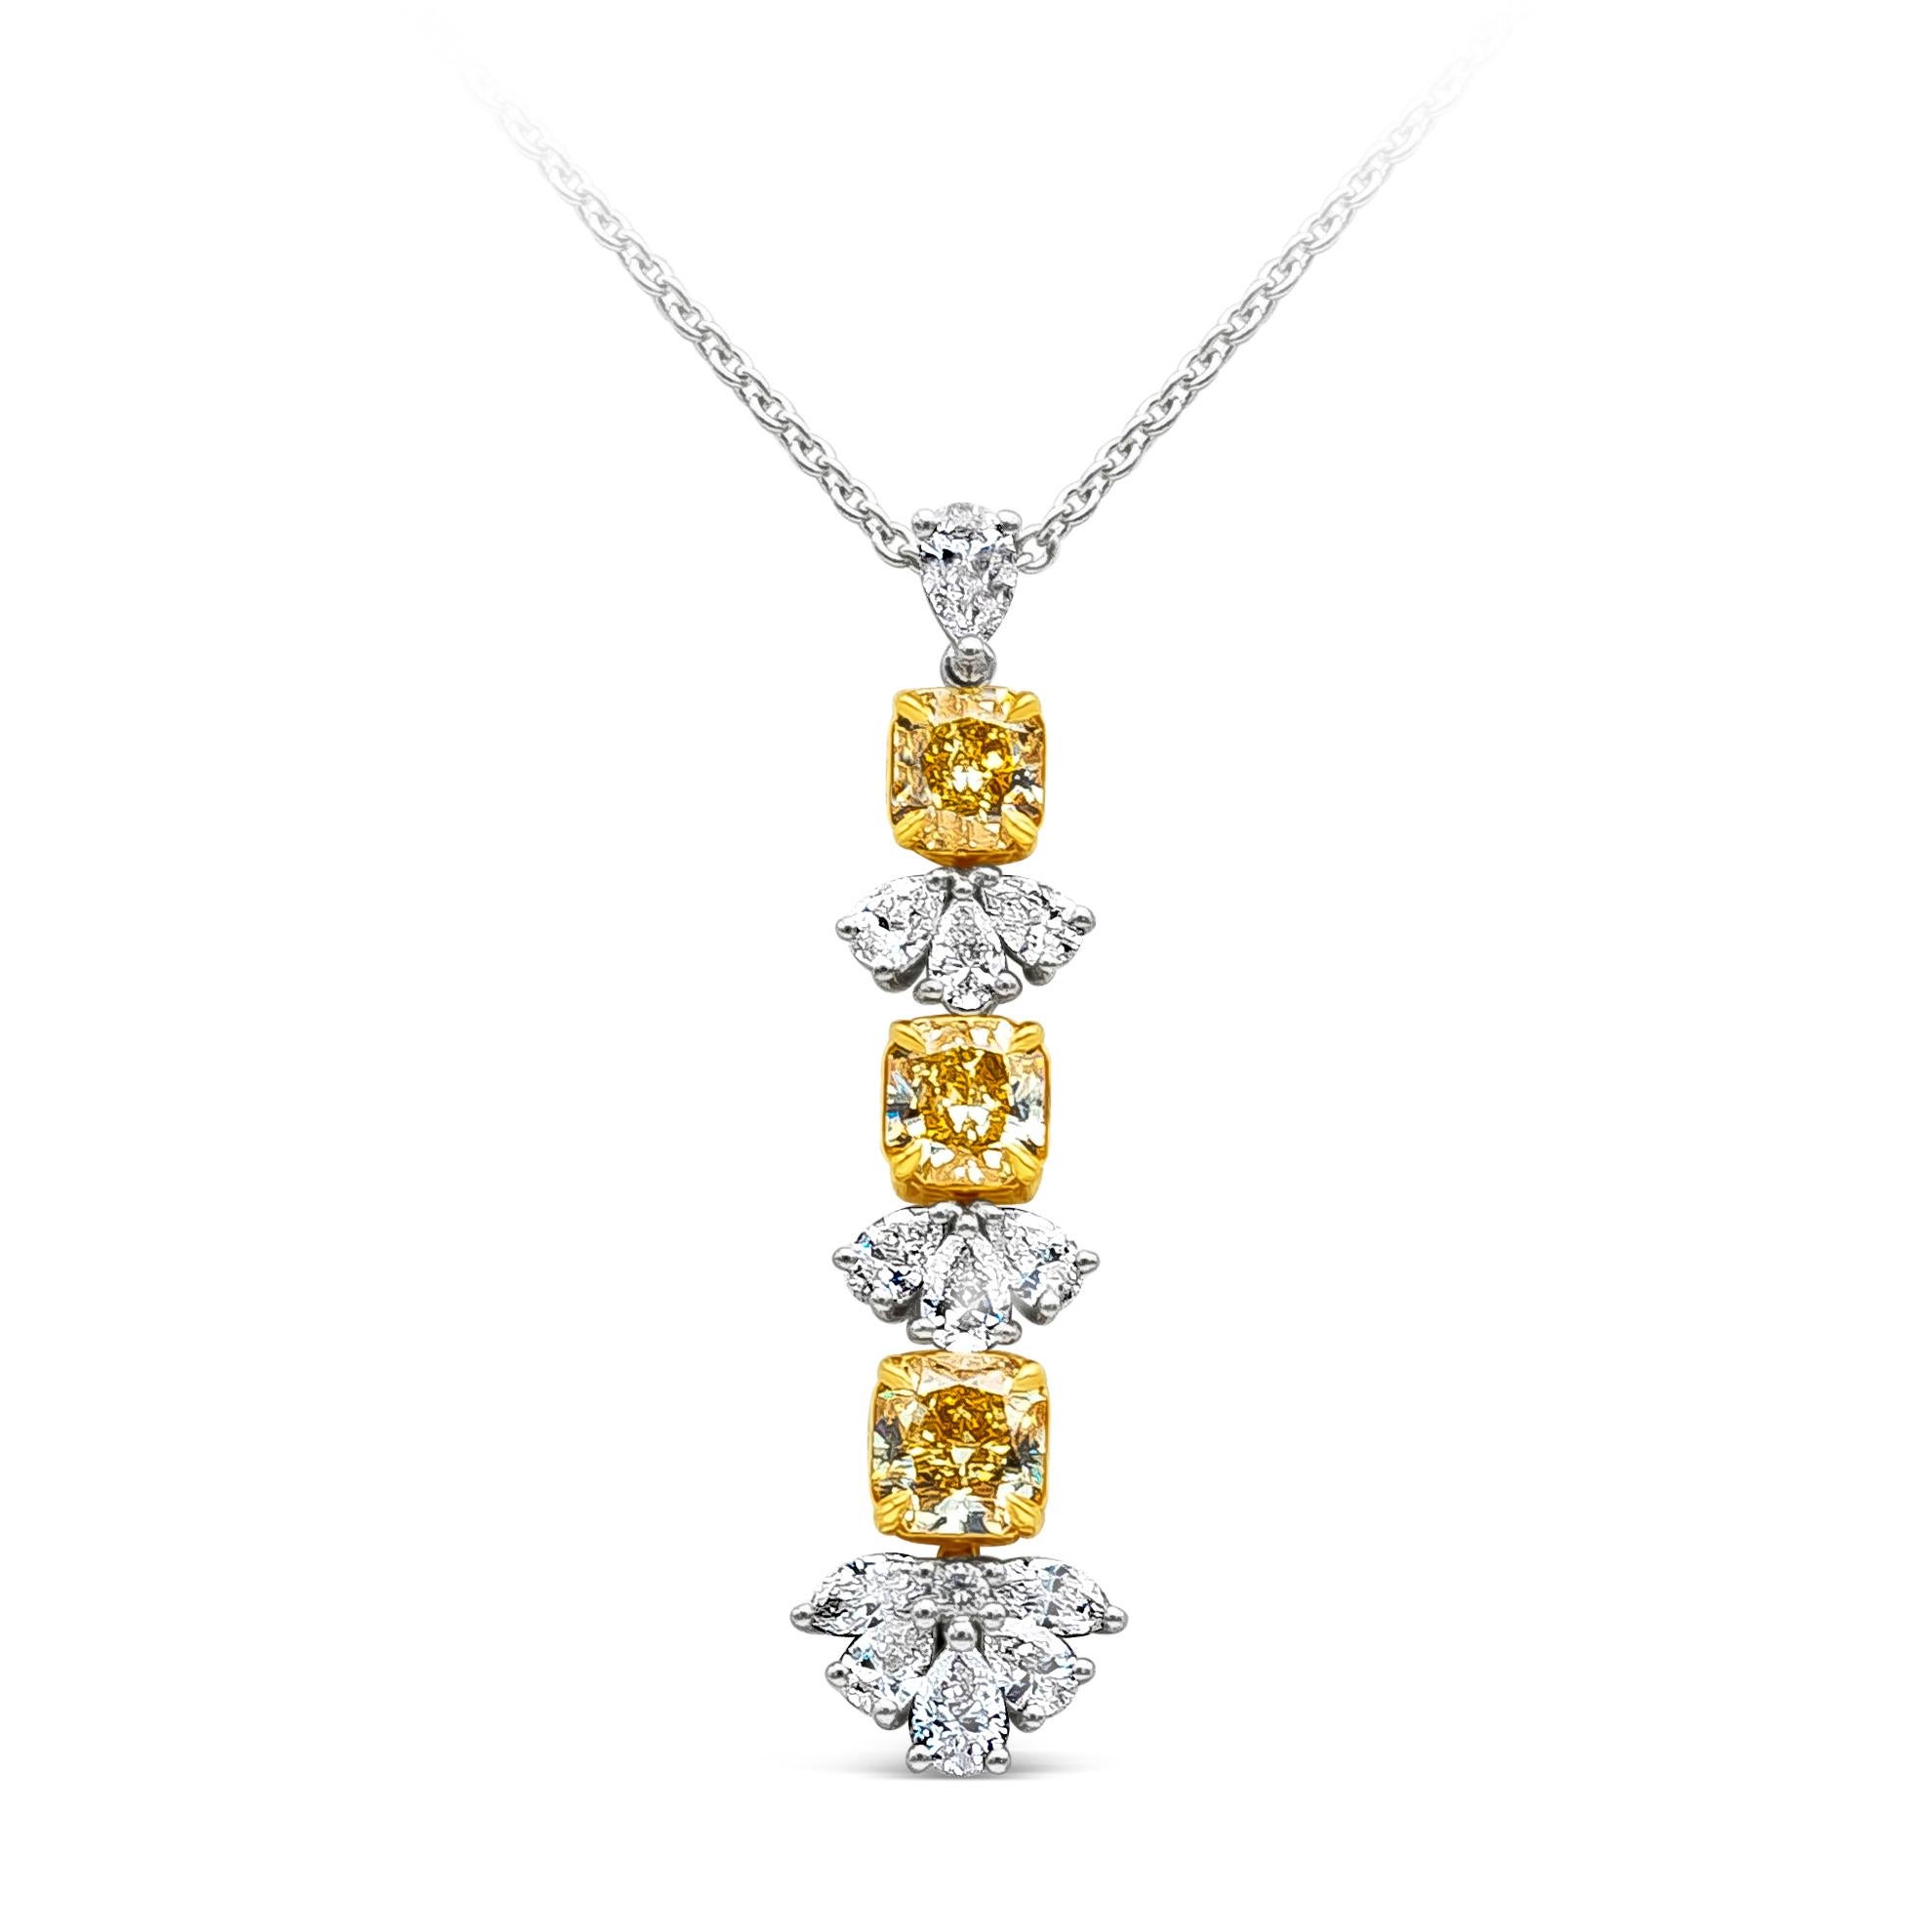 A chic drop pendant necklace showcasing 3 color-rich radiant cut fancy yellow diamonds weighing 3.13 carats total, VS in Clarity. Set on a 18K Yellow Gold basket. Each separated by mixed-cut (pear shape, marquise & round) diamonds on a drop design,